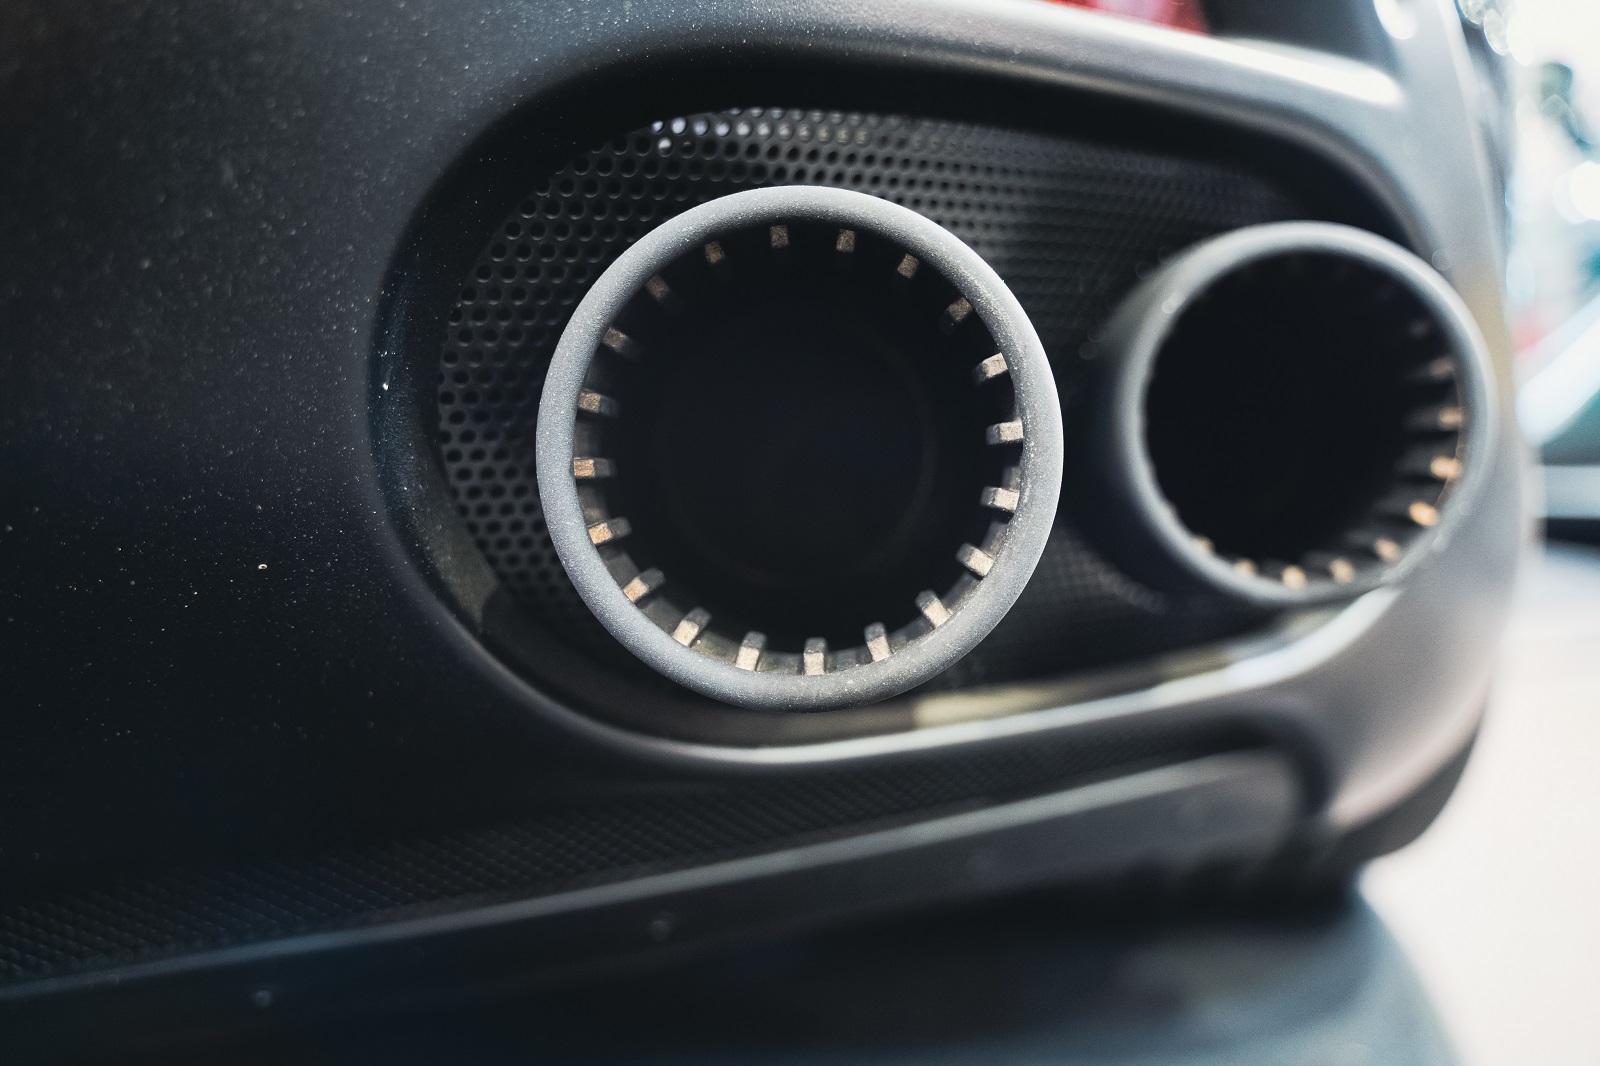 <p class="wp-caption-text">Image Credit: Shutterstock / macondo</p>  <p><span>Modifications that significantly increase noise, like certain aftermarket exhaust systems, can violate noise ordinance laws.</span></p>